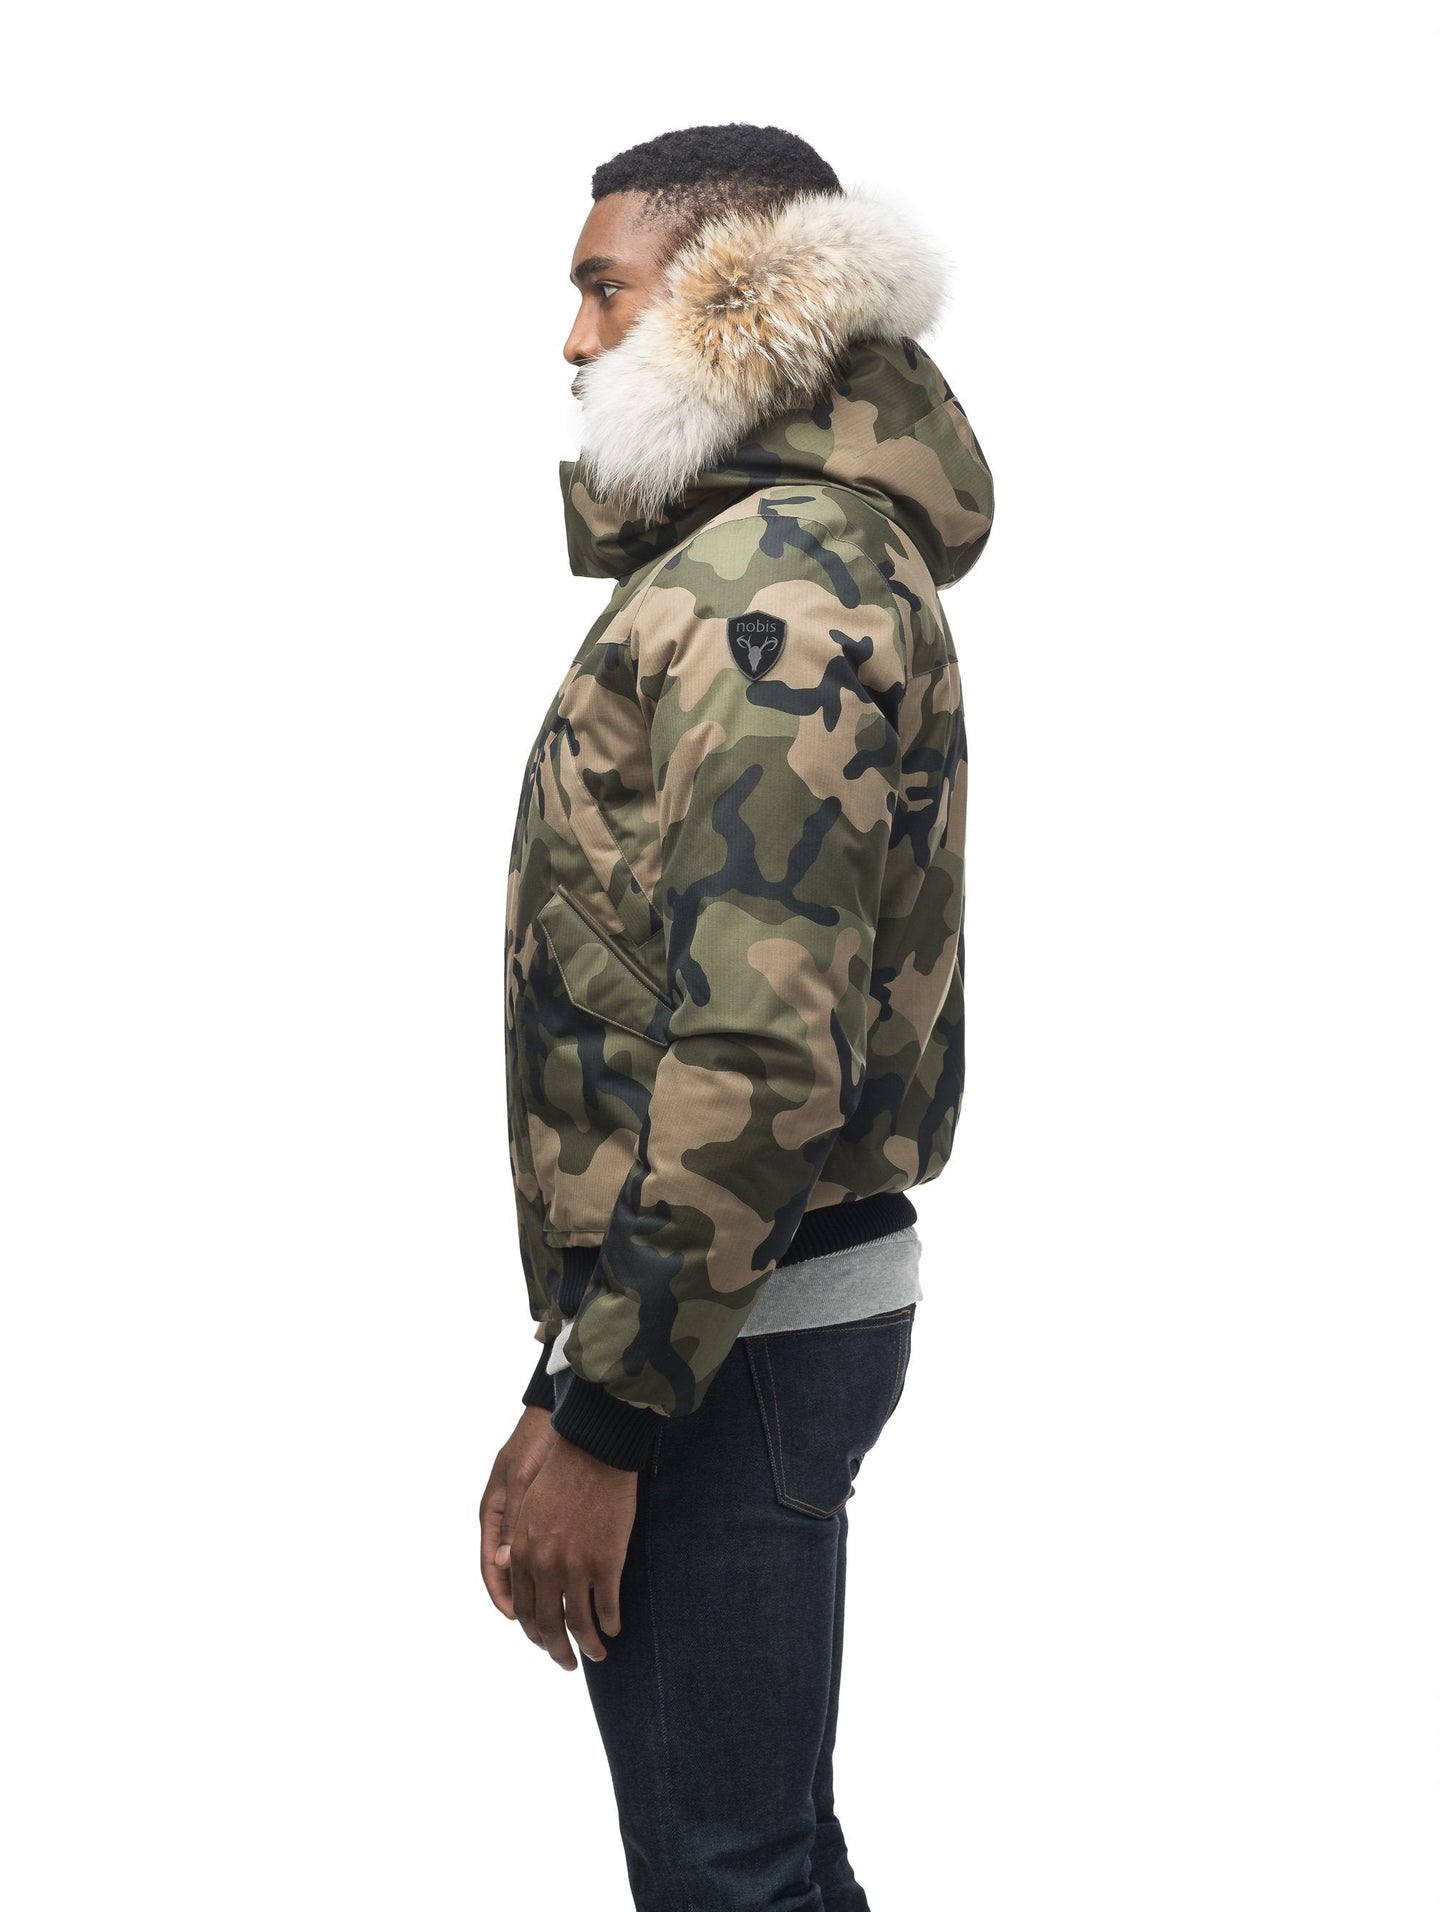 Men's classic down filled bomber jacket with a down filled hood that features a removable coyote fur trim and concealed moldable framing wire in Camo